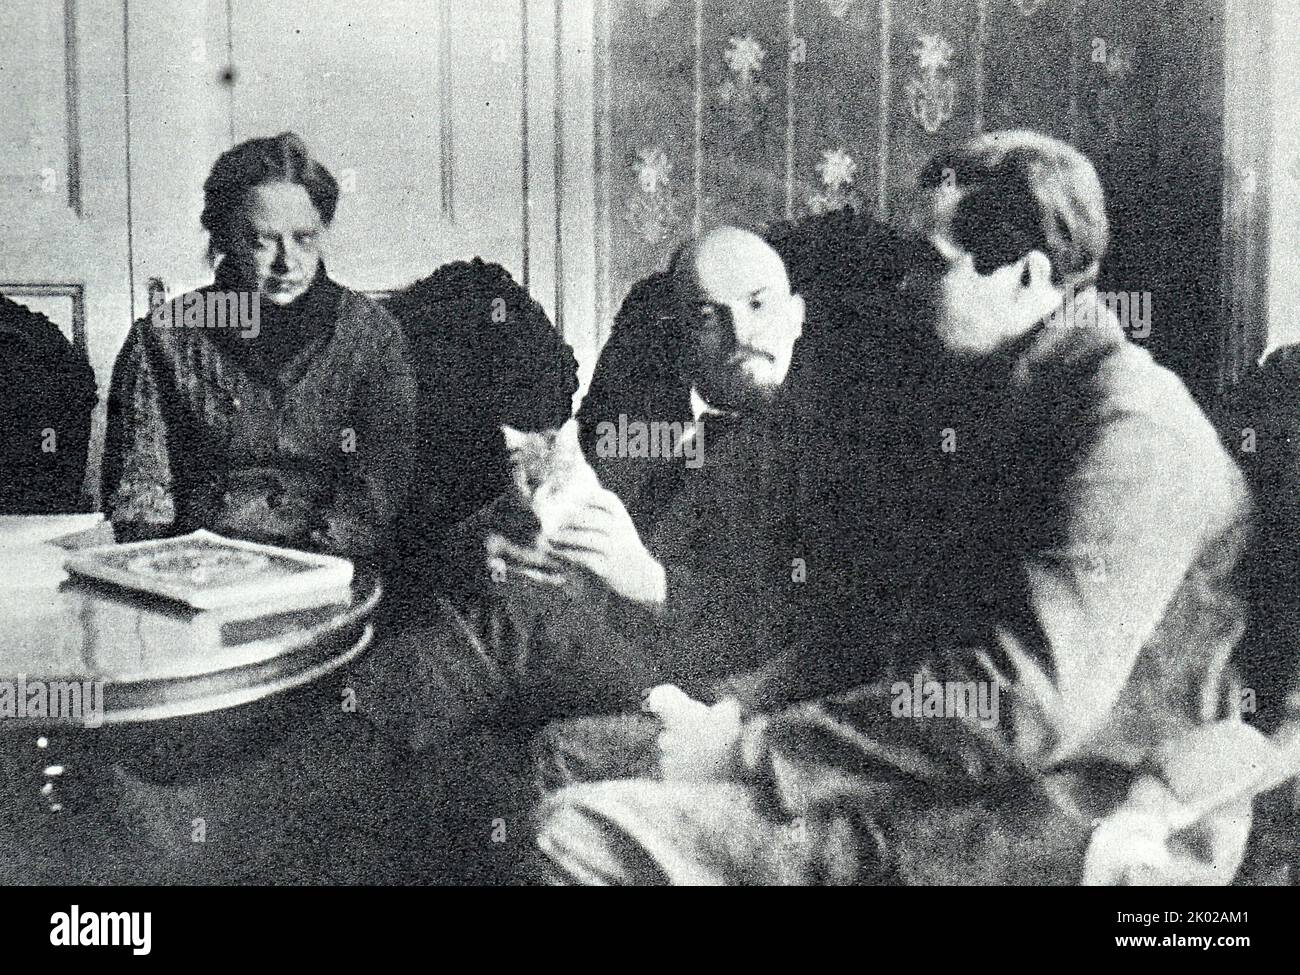 Vladimir Lenin with Krupskaya, , in their Kremlin apartment talking with American correspondent Lincoln Eyre. February 1920, Moscow. Photographer - W. Cubes (American). Stock Photo